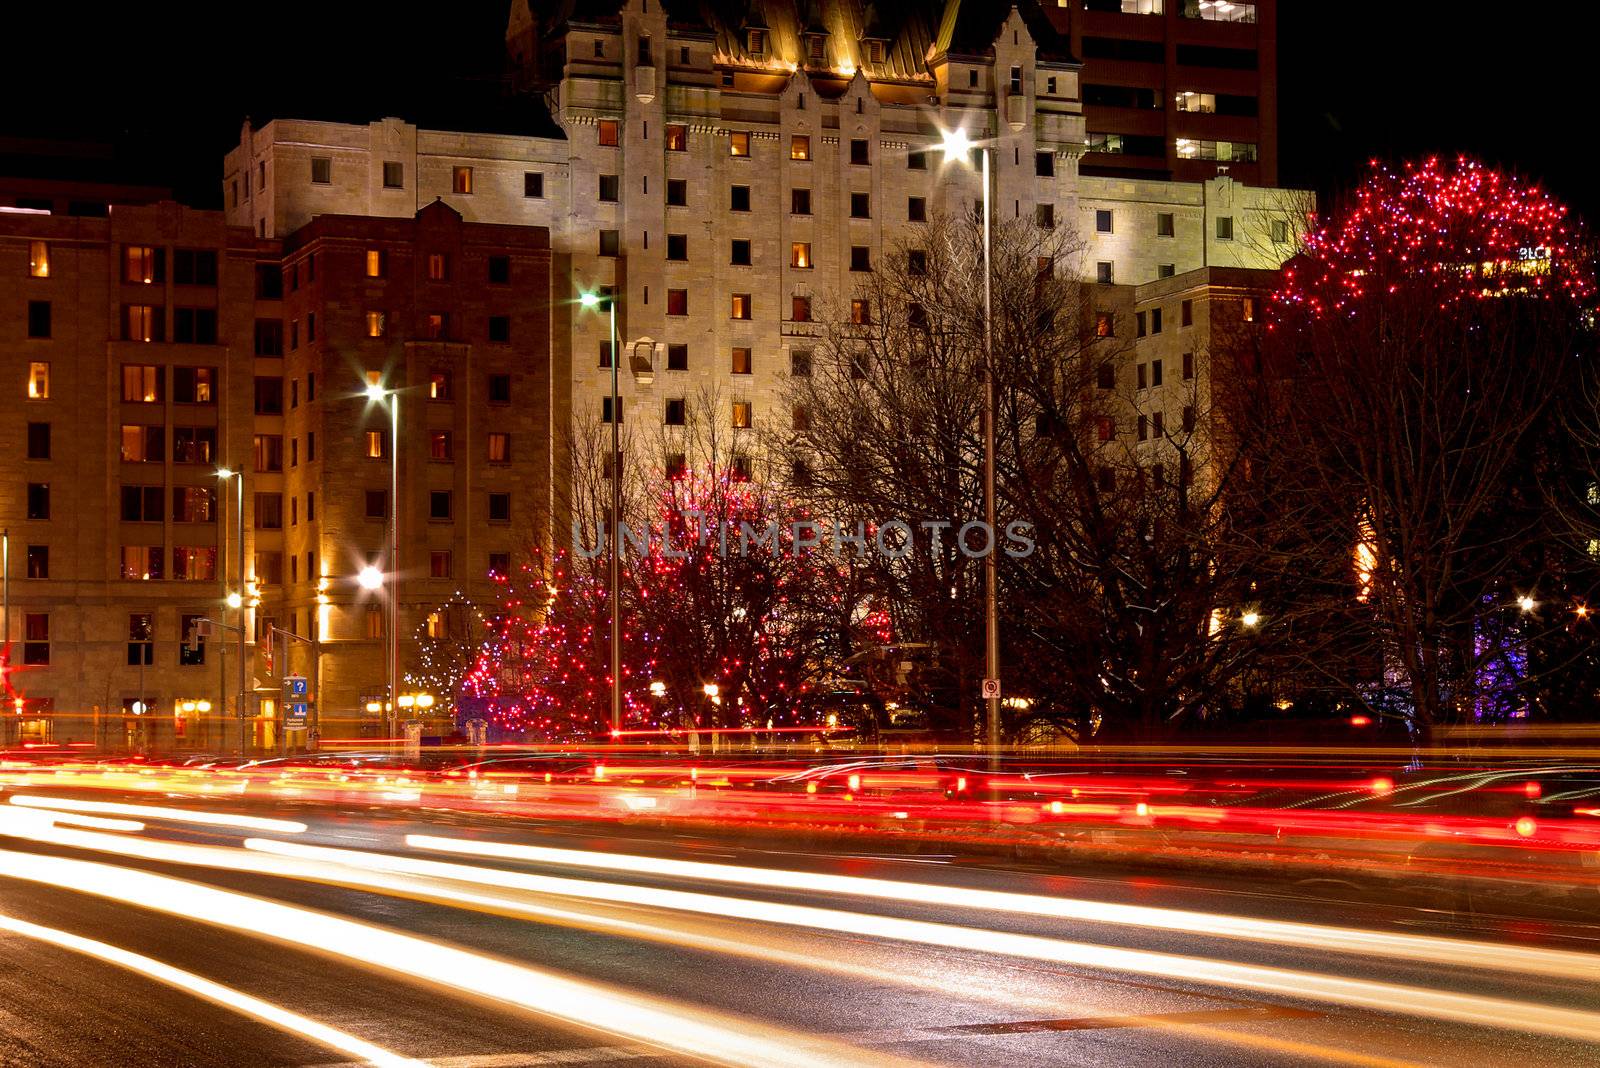 A night shot of car light trails on the street.